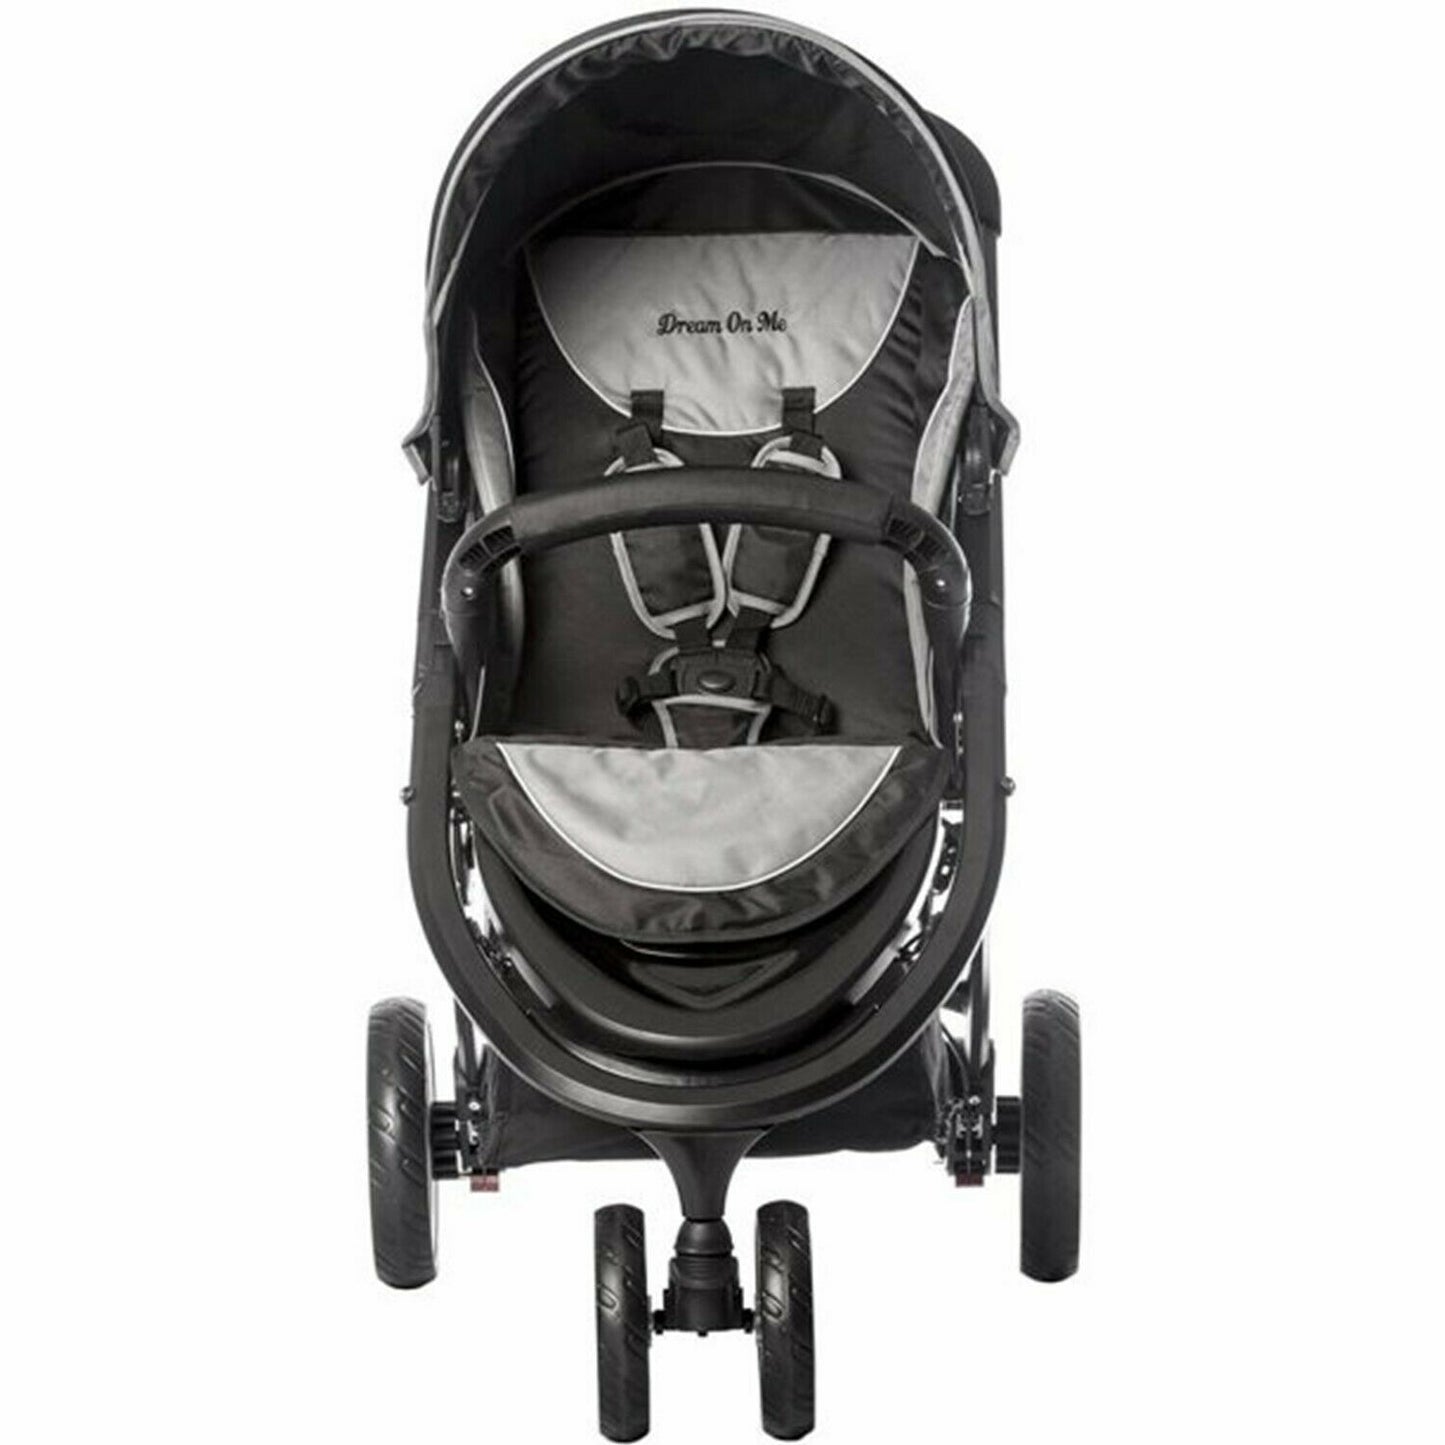 Baby Stroller Travel System Lightweight Multi Recline Seat Infants Toddlers Kid